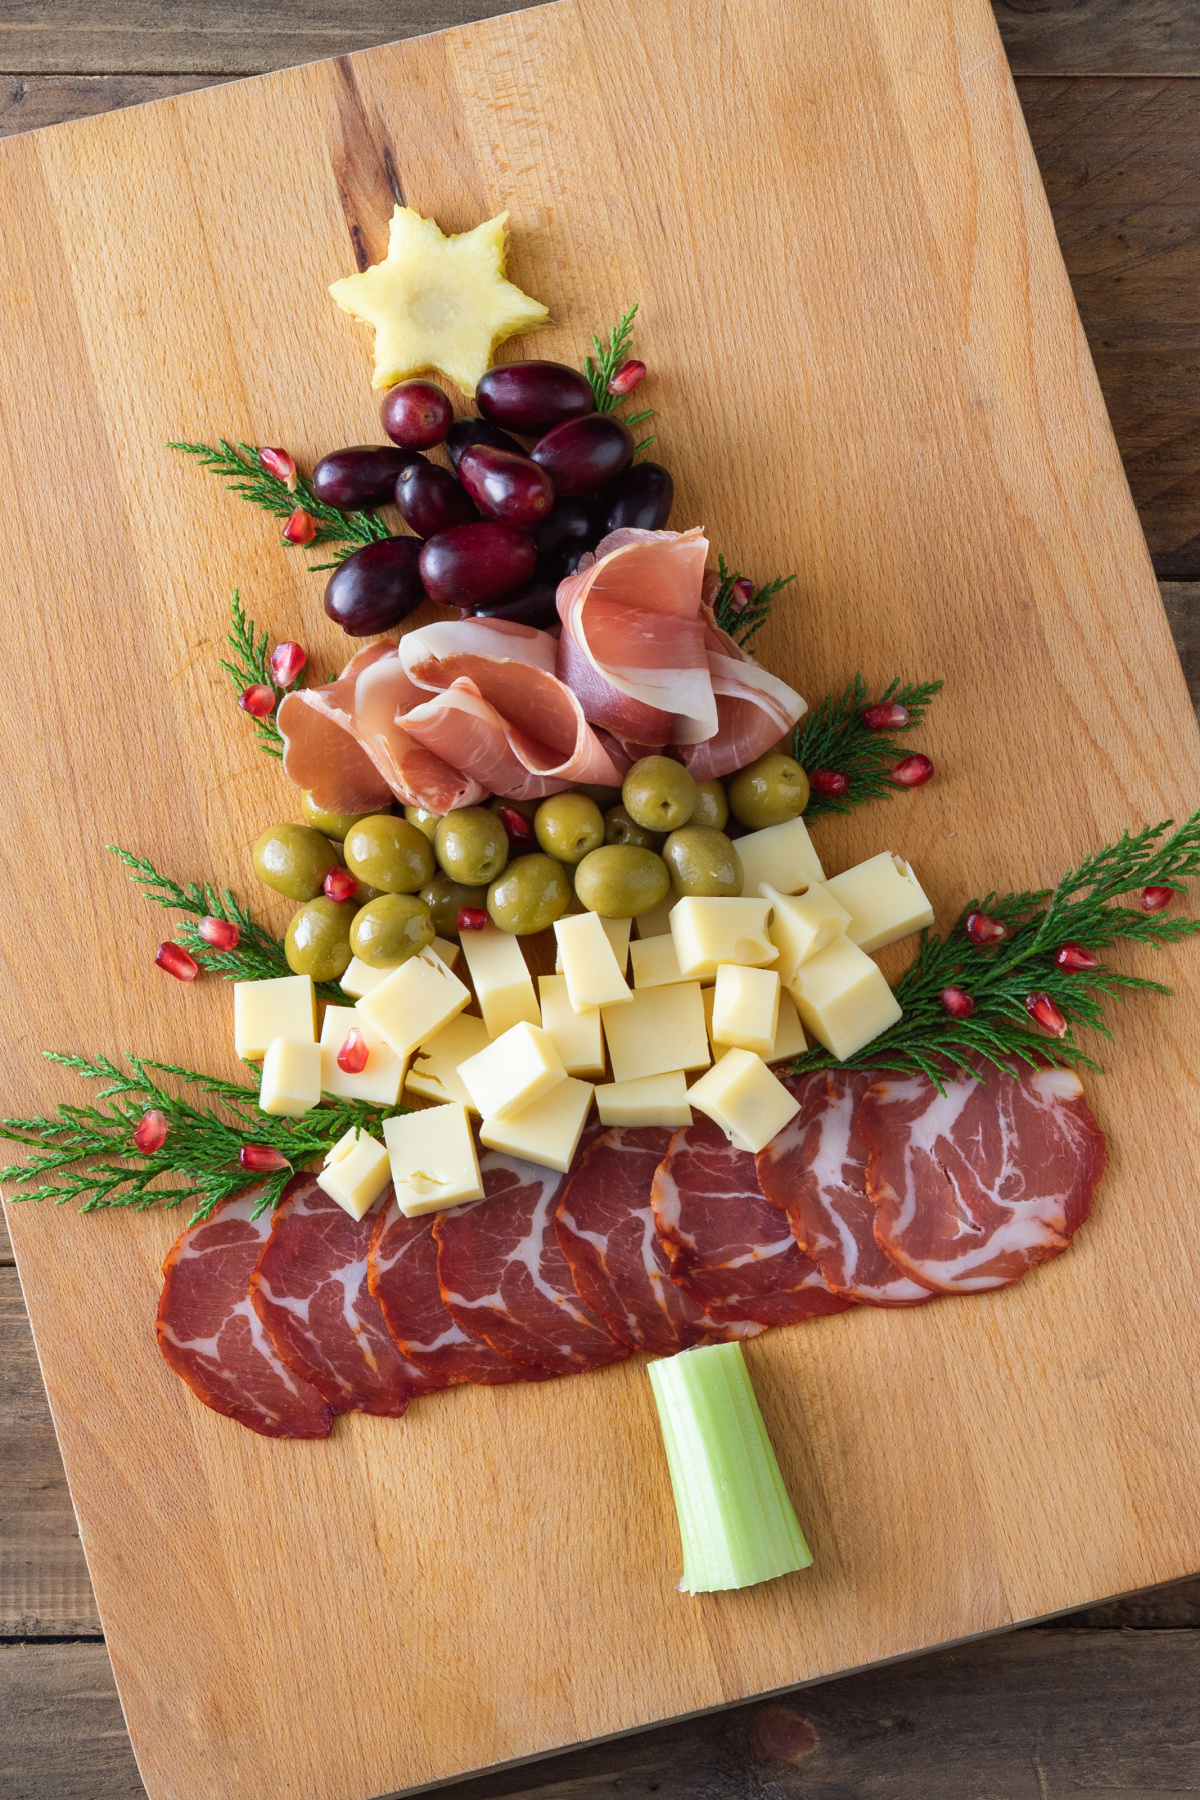 A wooden cutting board with a christmas tree made of meats and olives.